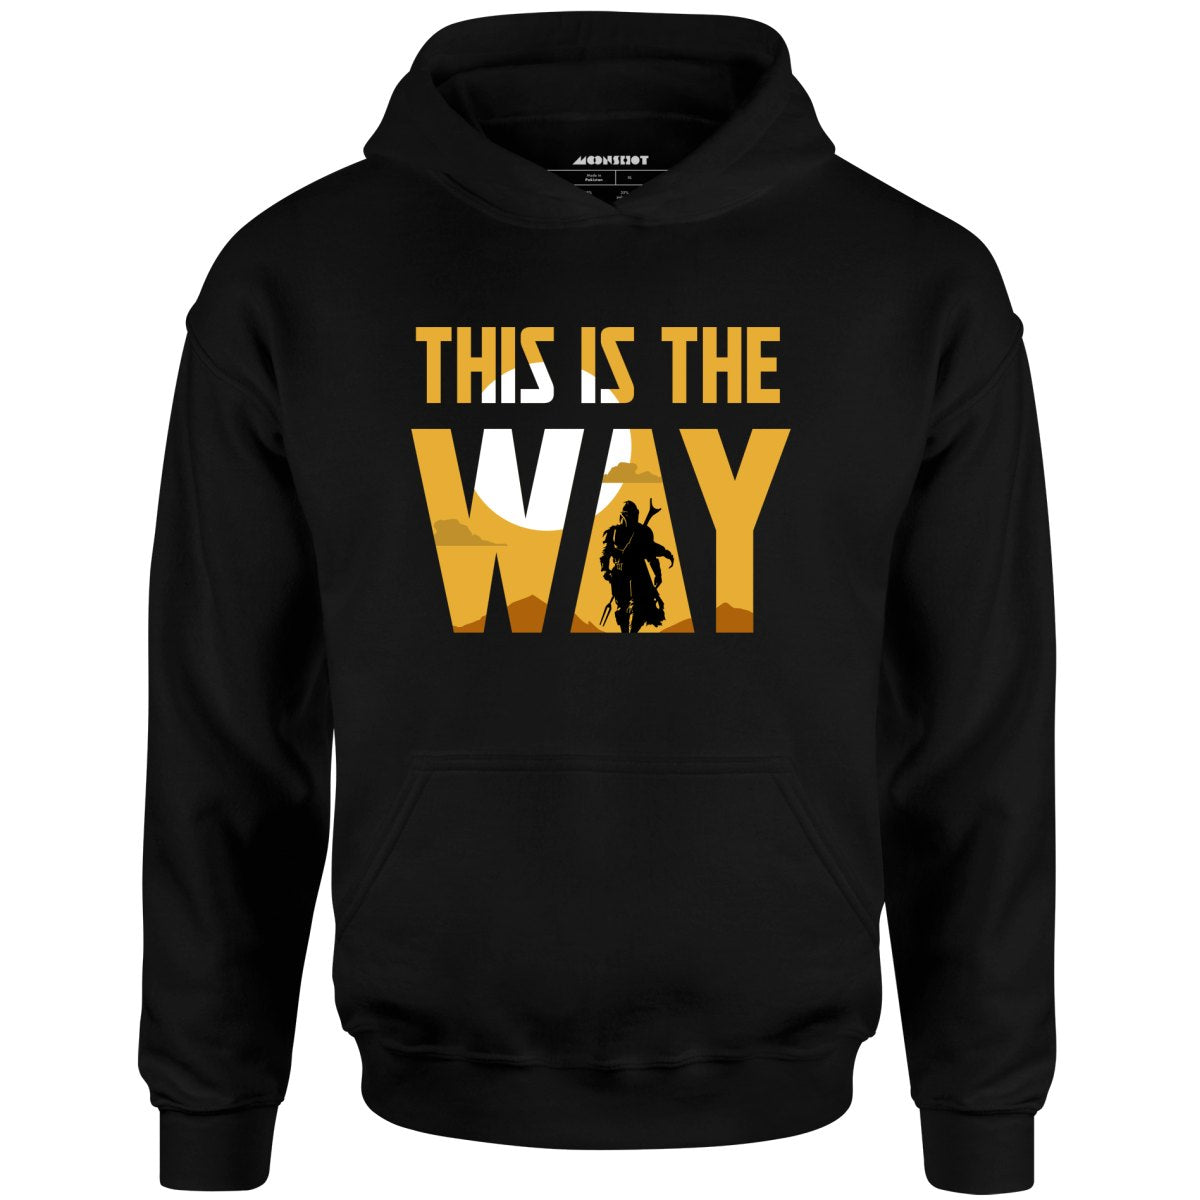 This is The Way - Unisex Hoodie